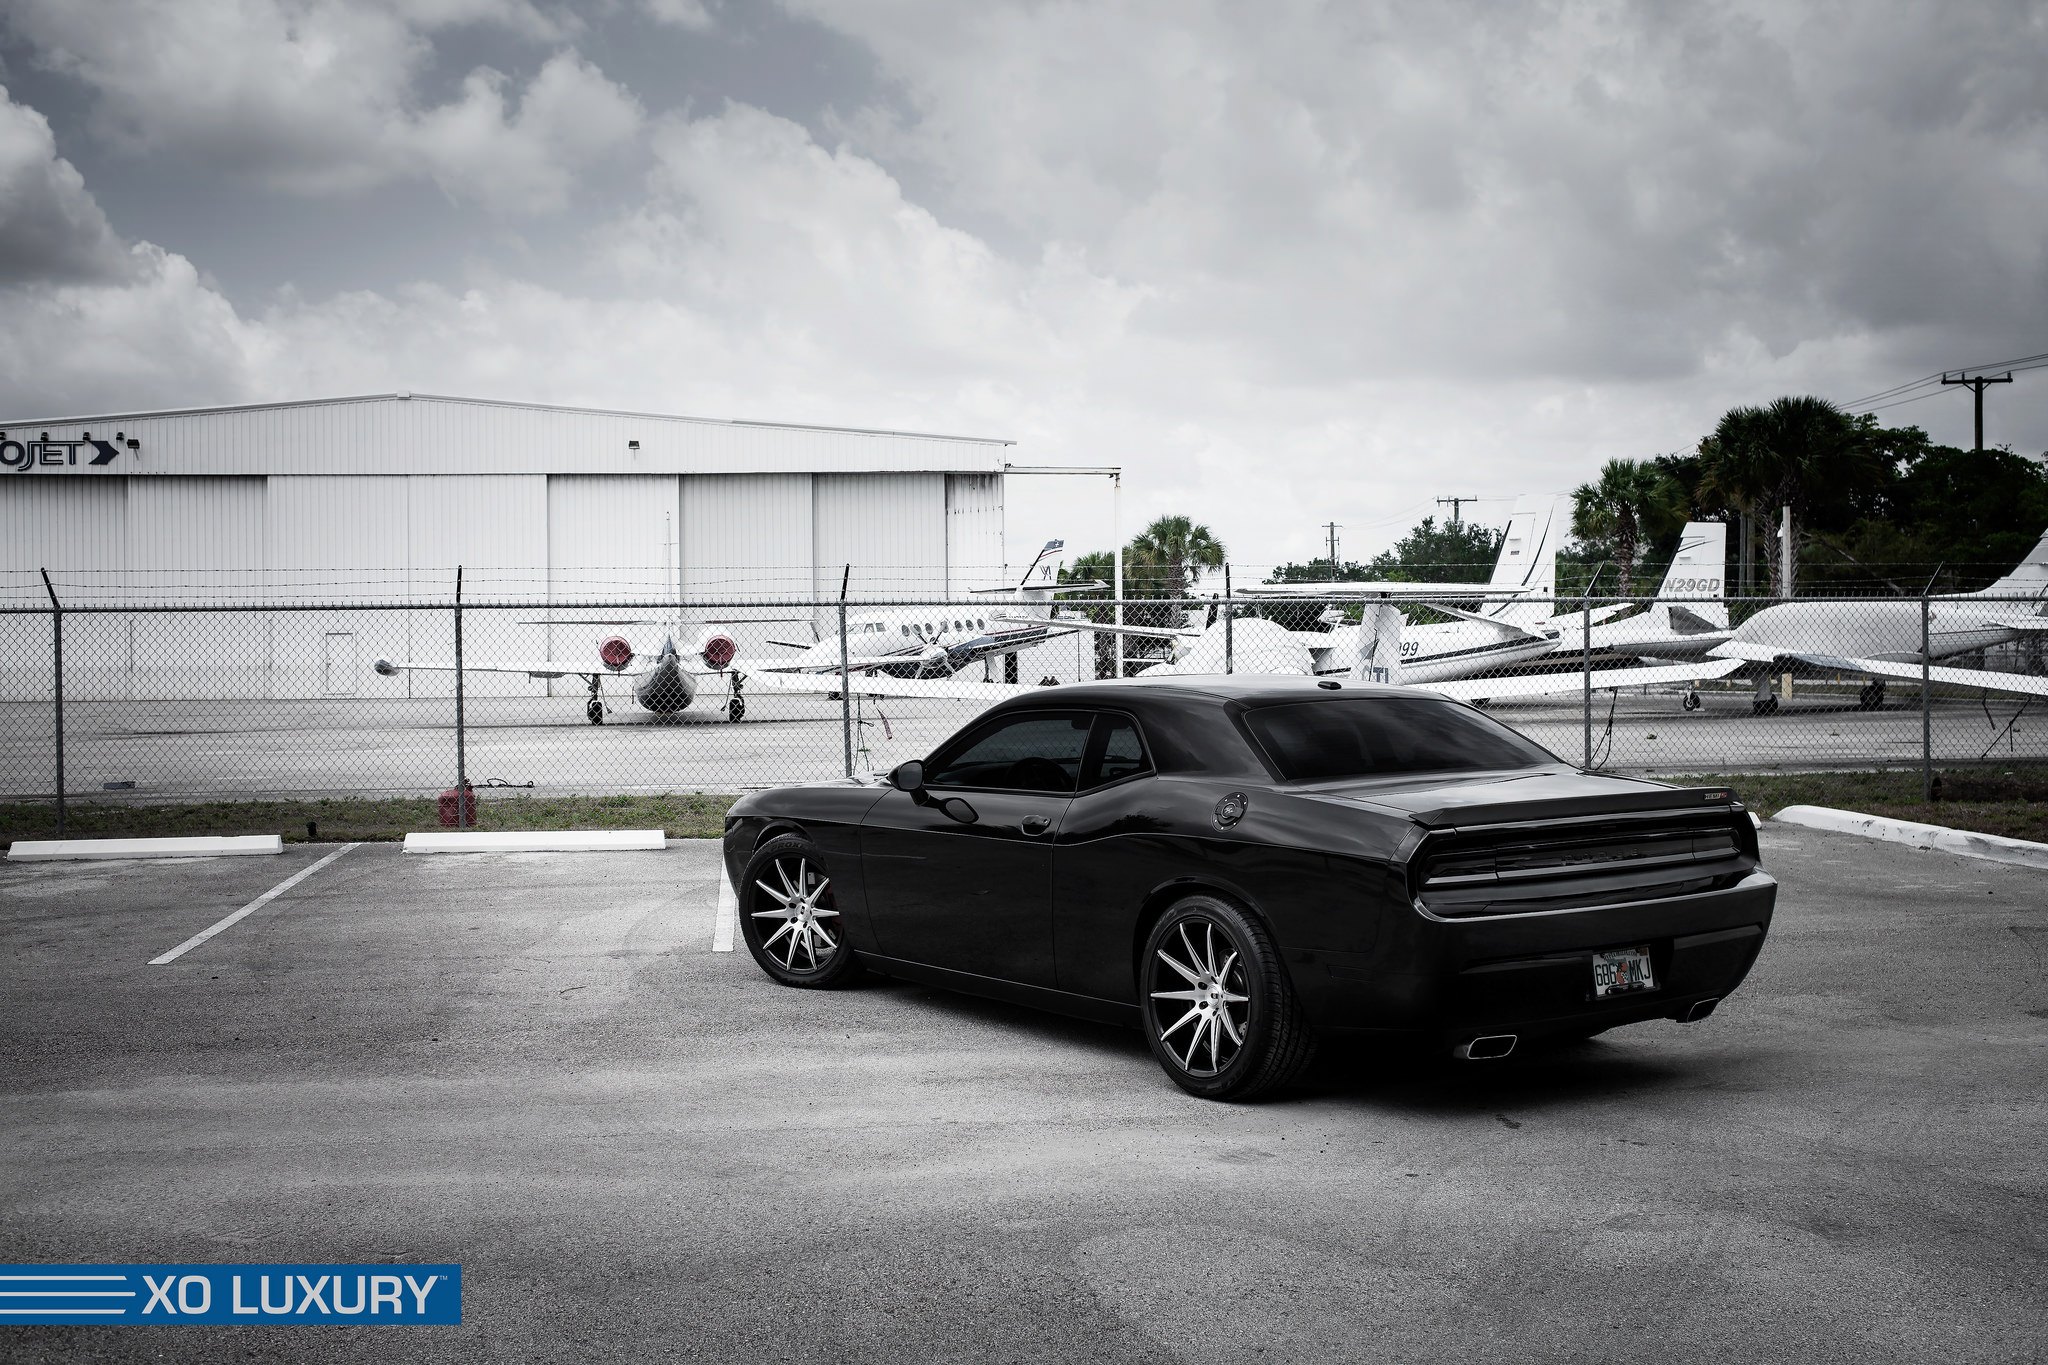 Dodge Challenger R/T Black Taillights - Photo by XO Luxury